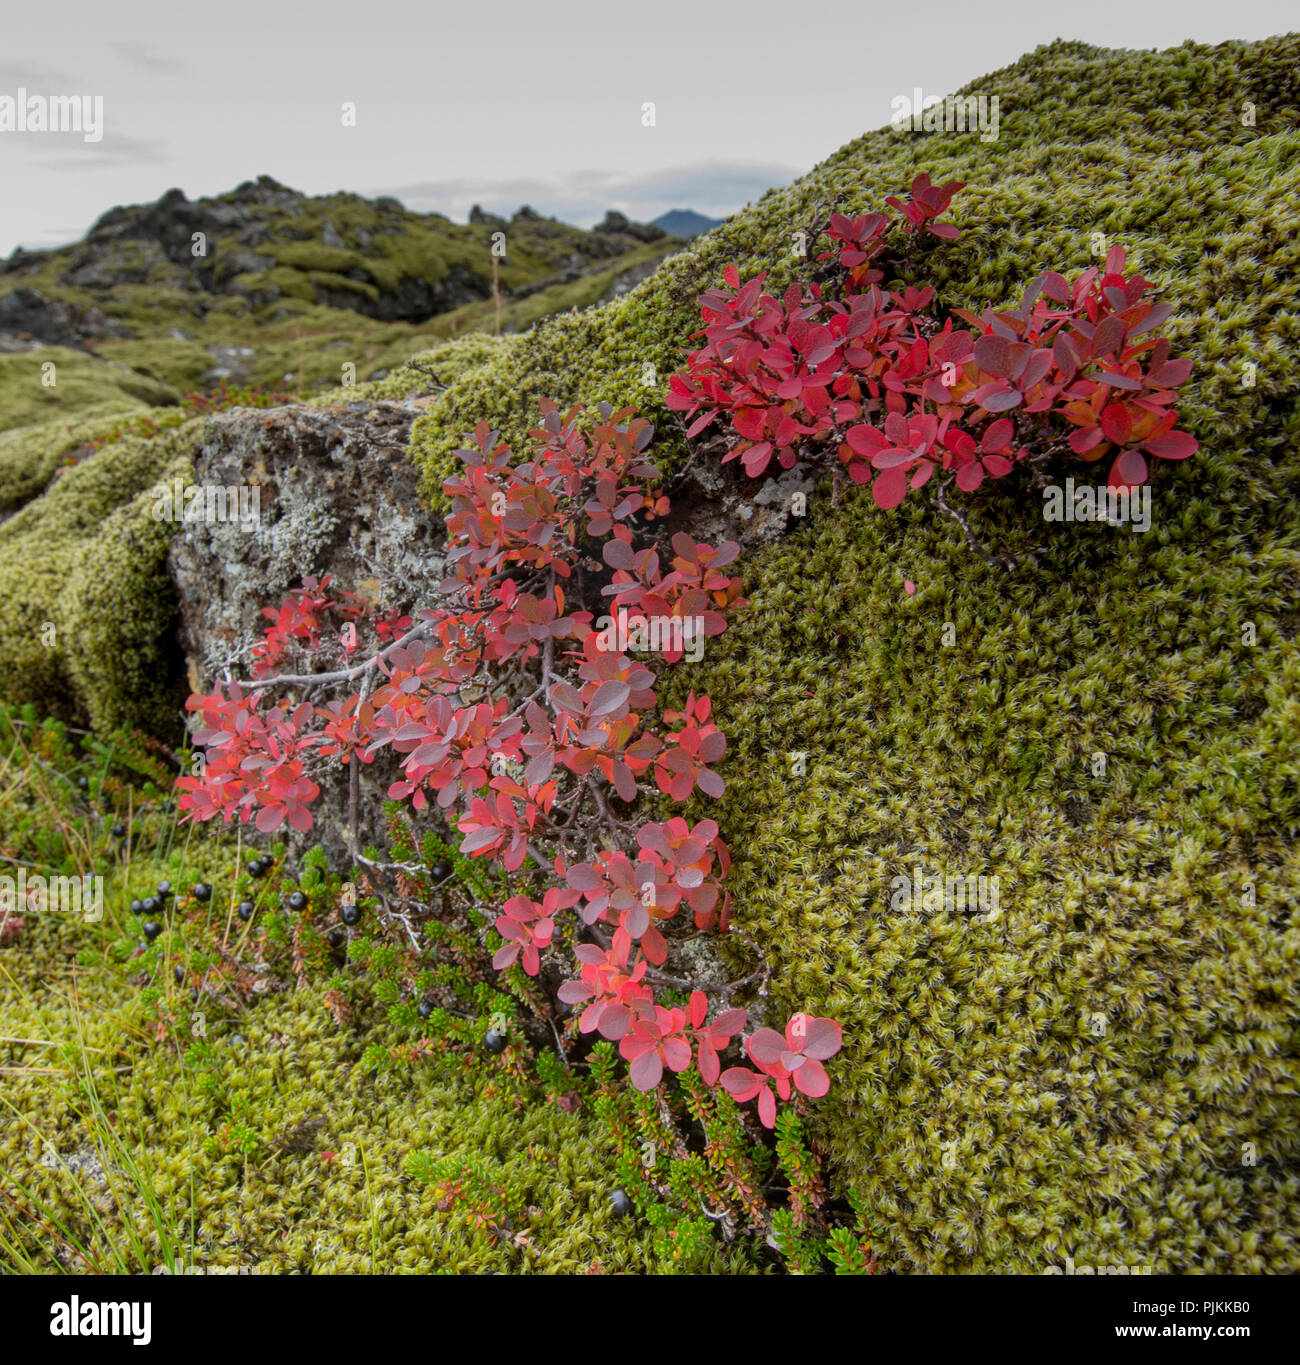 Iceland, moss-covered lava rocks, pillow-shaped, face in moss, red blueberry foliage Stock Photo